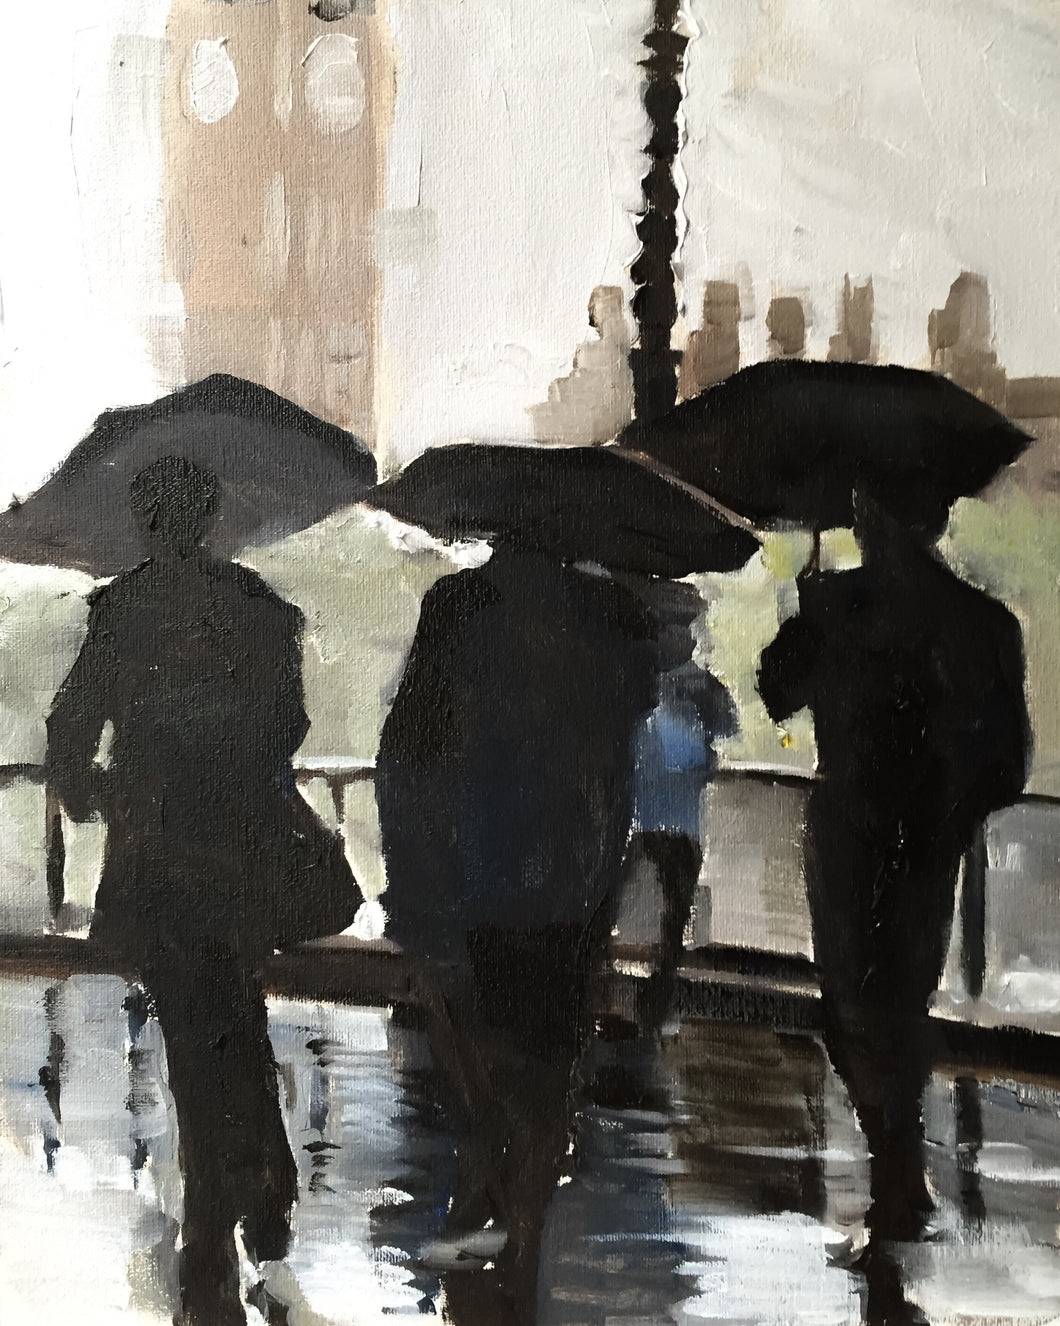 London raining Painting , Wall art, Canvas Print, Fine Art - from original oil painting by James Coates